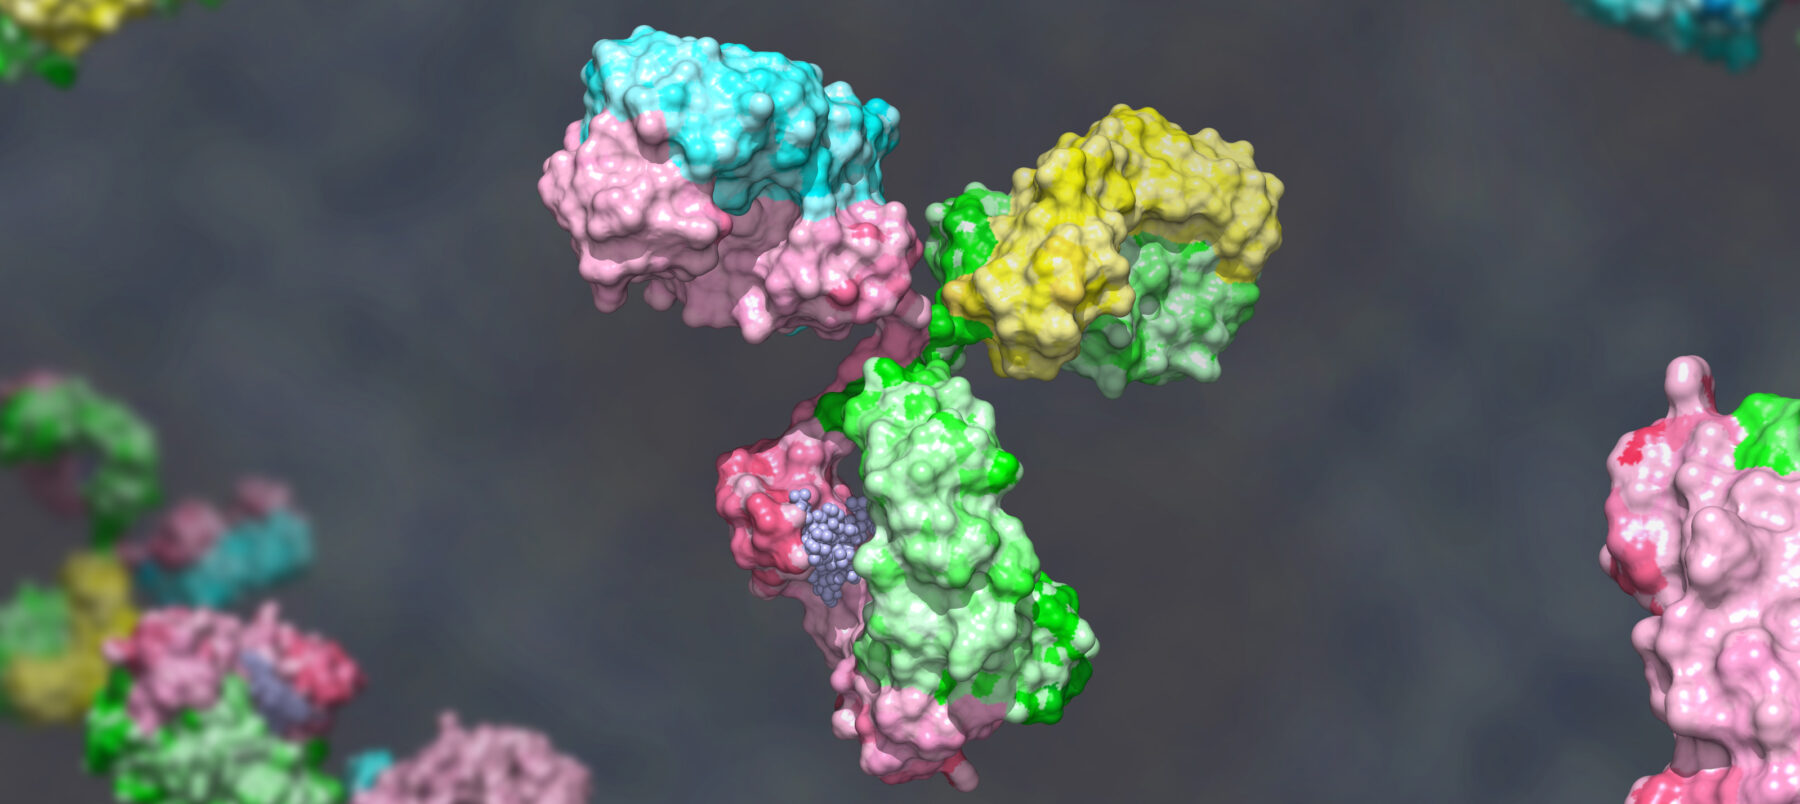 Bispecific antibody colored heavy chain in green and pink, light chain blue and yellow against gray background; glycosylated bispecific immunoglobulin engineered to target different antigens 3d render